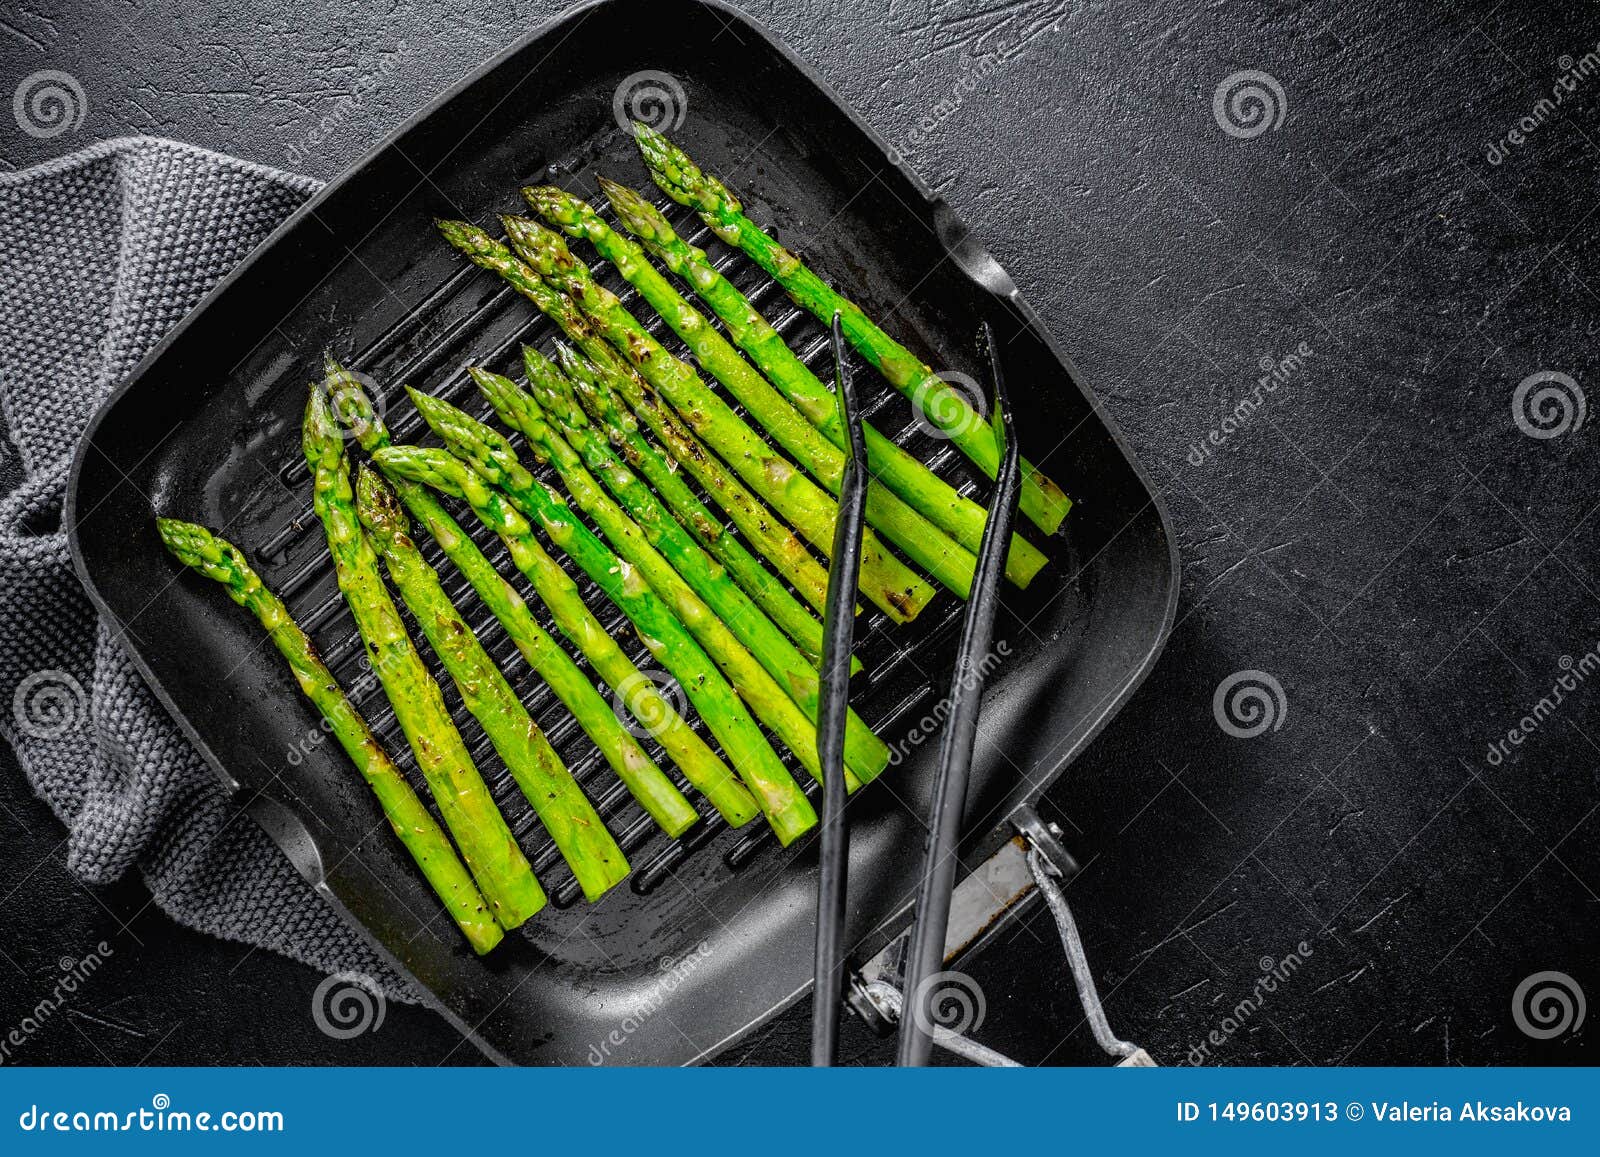 Grilled Asparagus On Grill Pan Stock Image - Image of ...